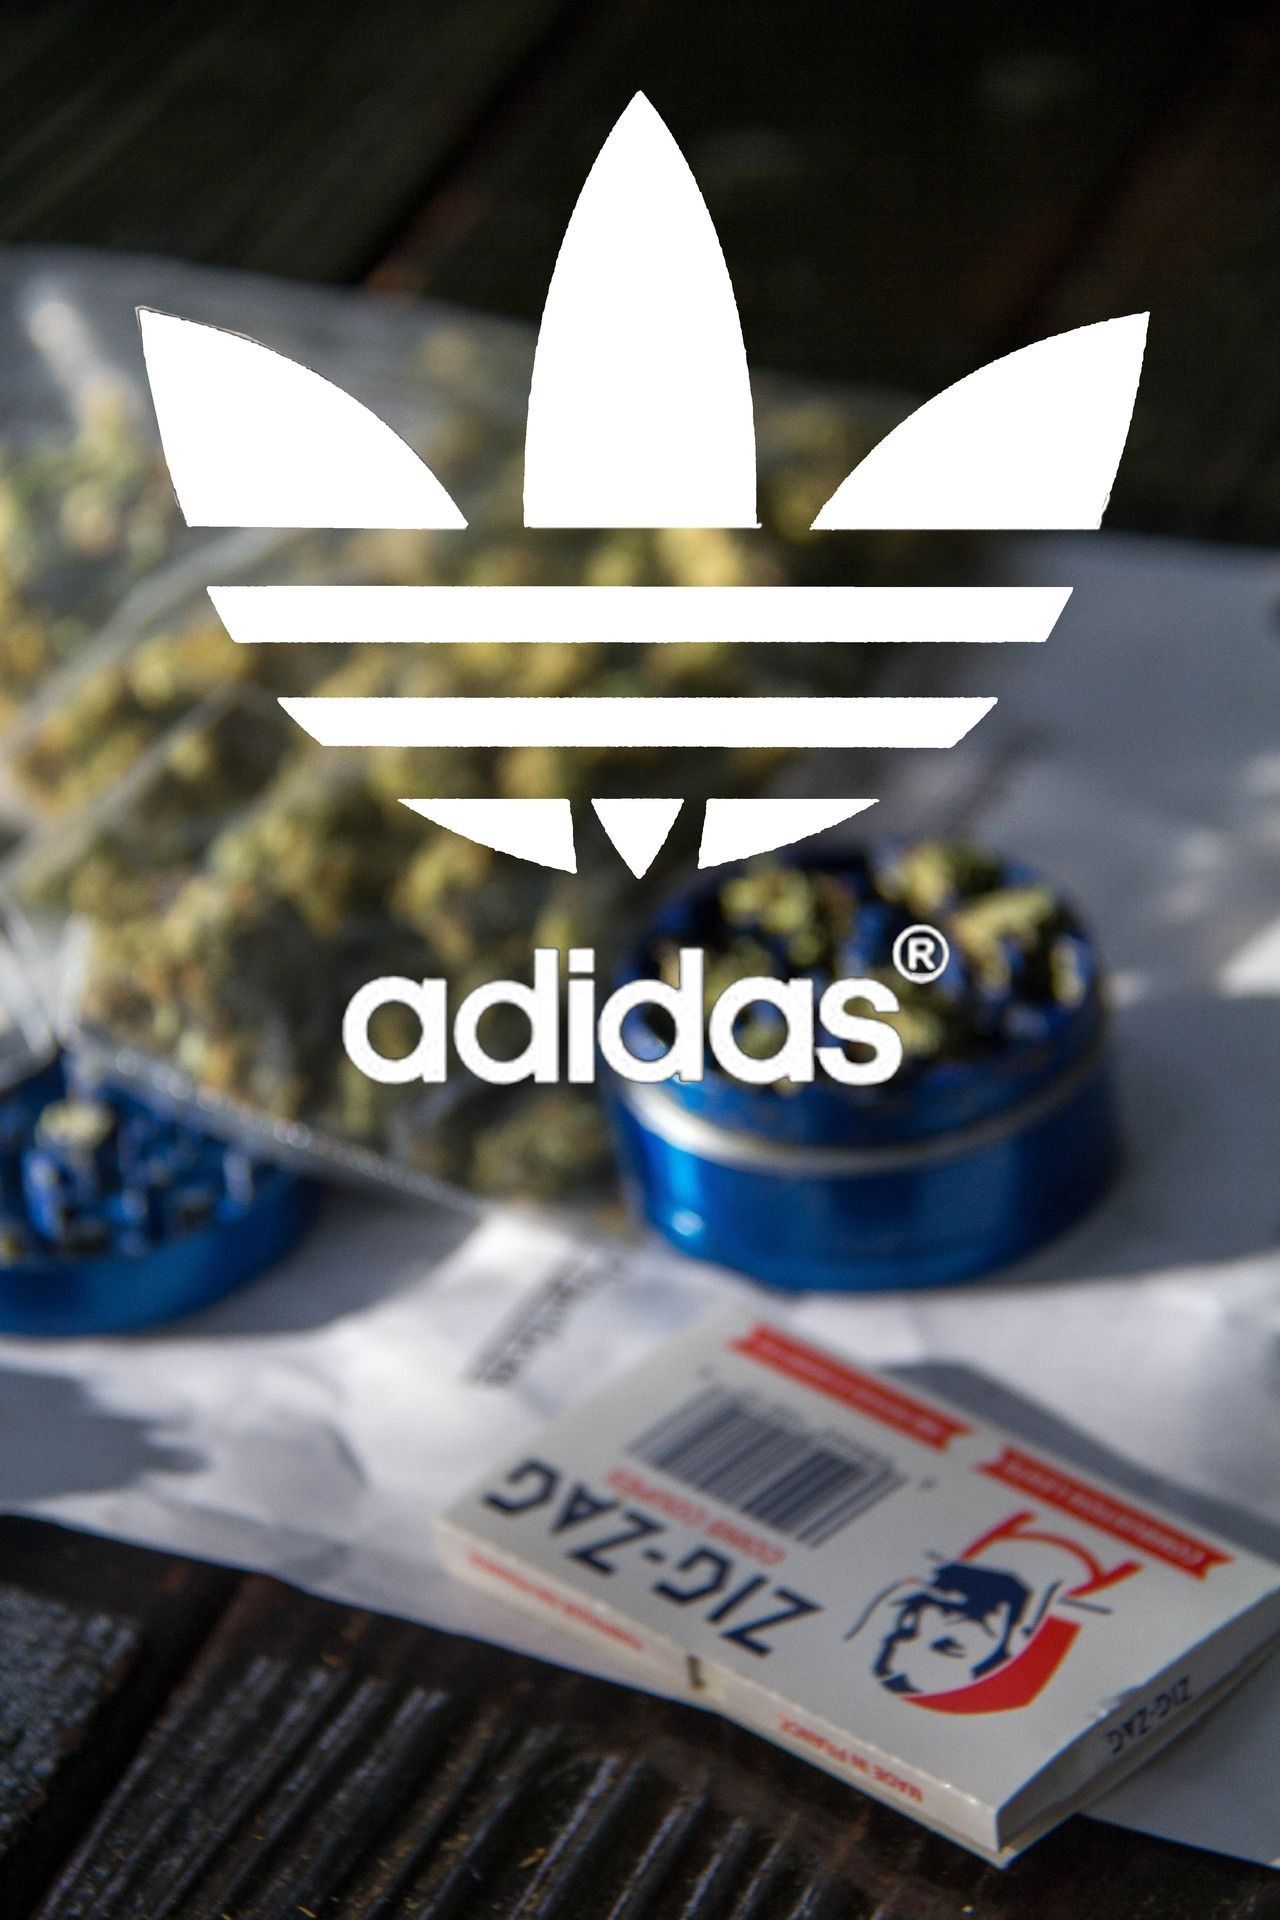 Cool Dope Weed Iphone Wallpapers